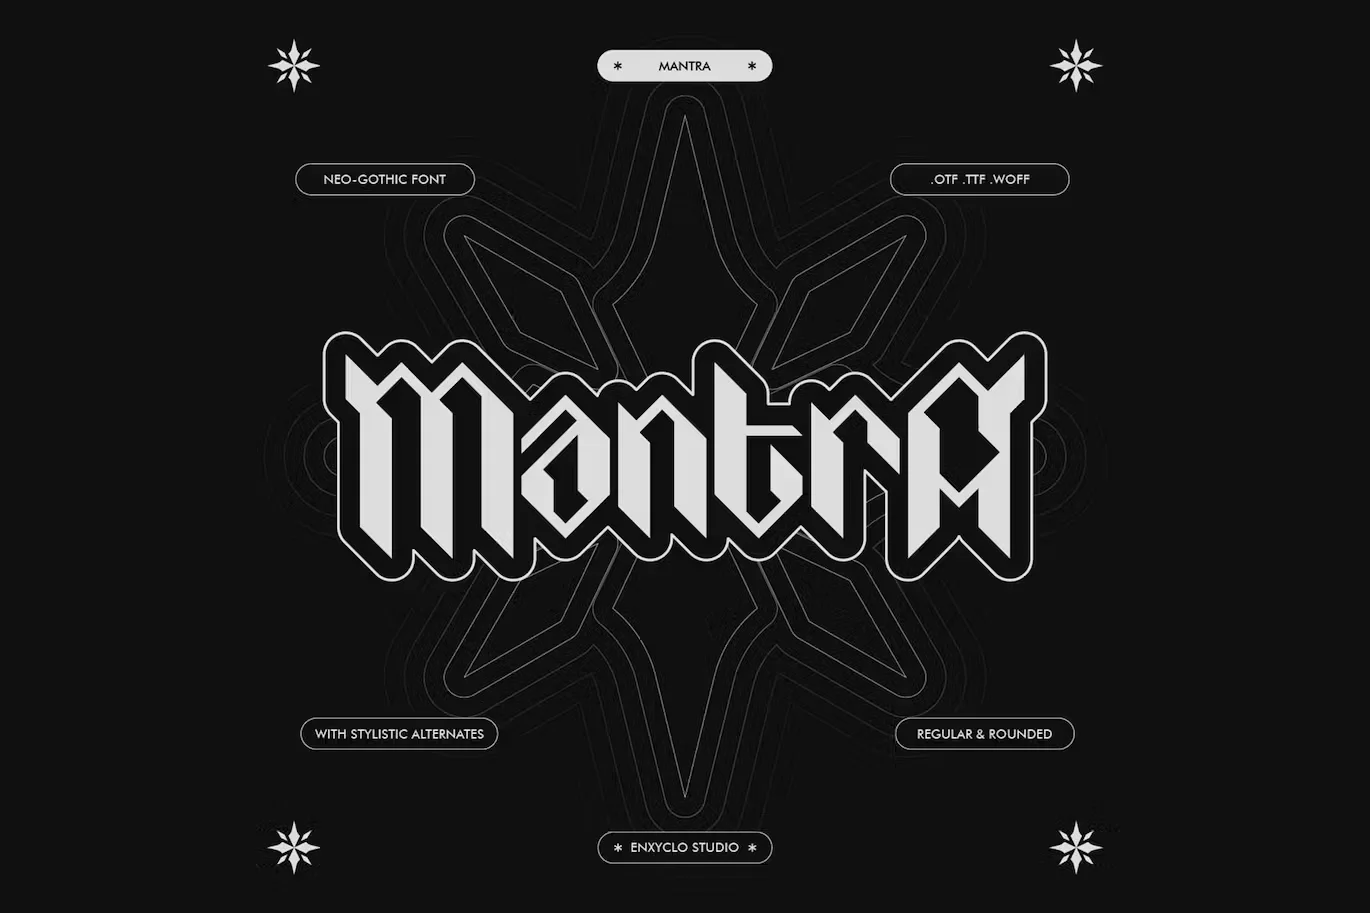 MANTRA - Neo Gothic Font